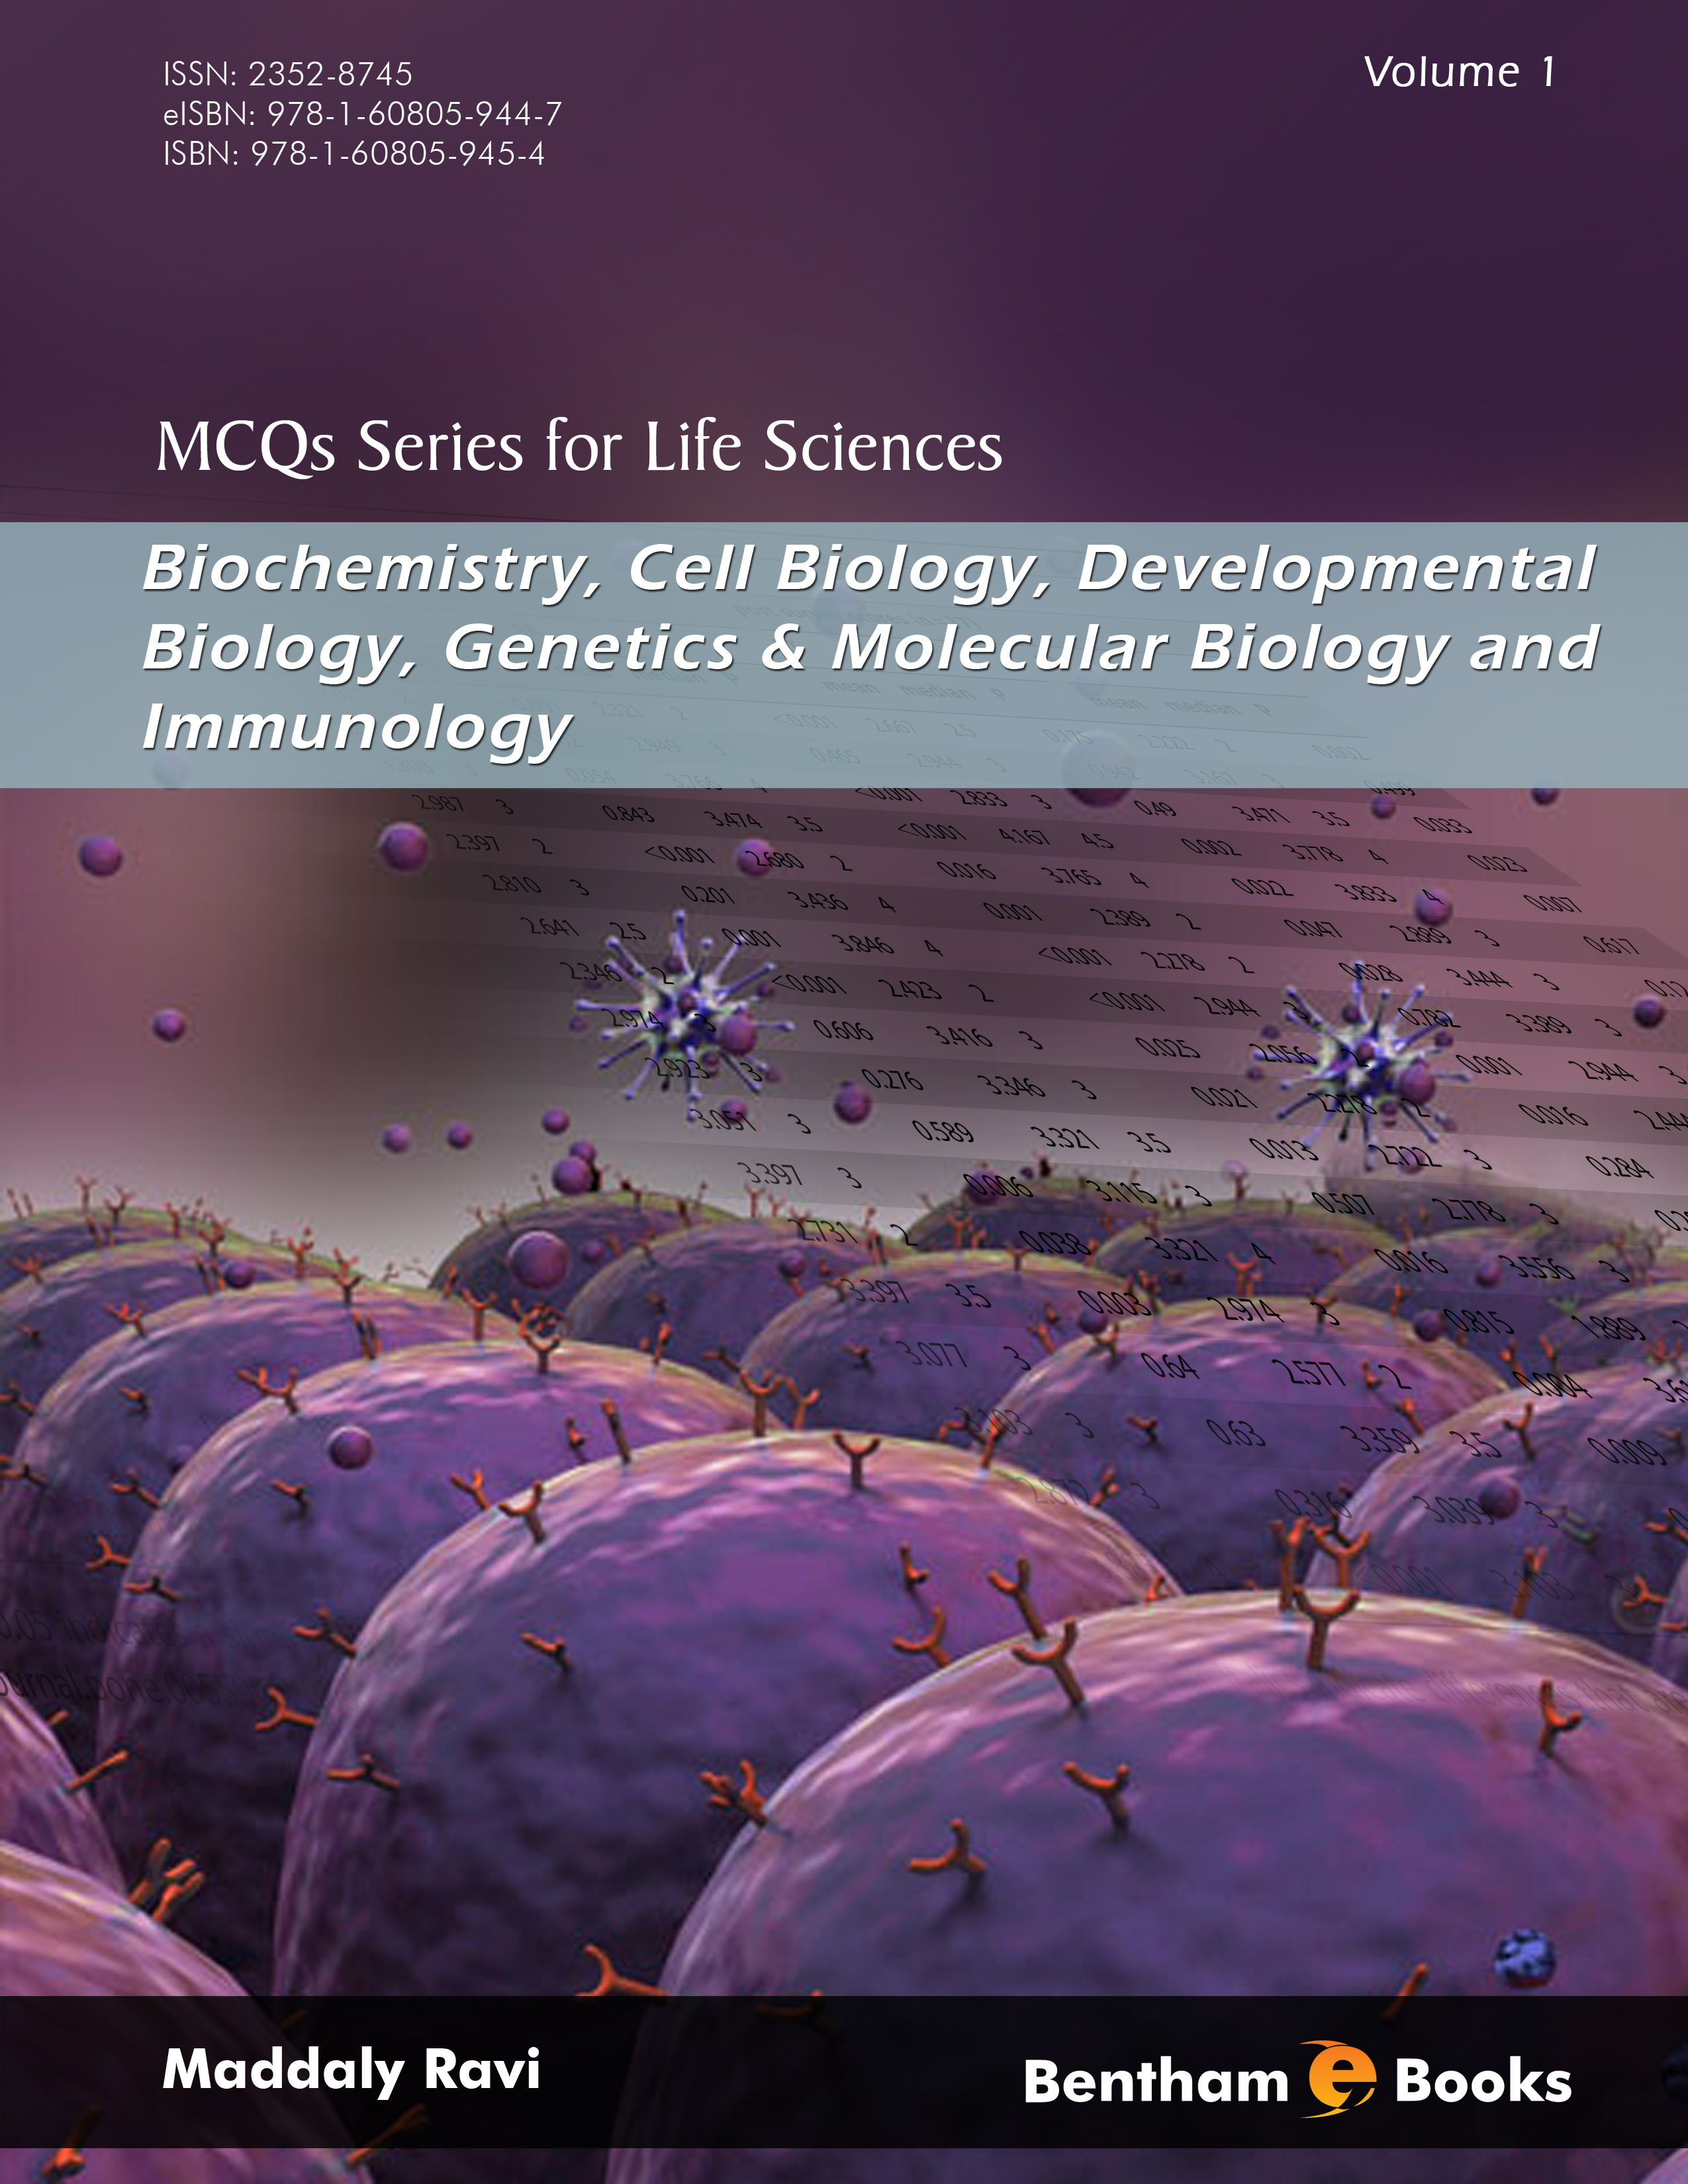 MCQs Series for Life Sciences